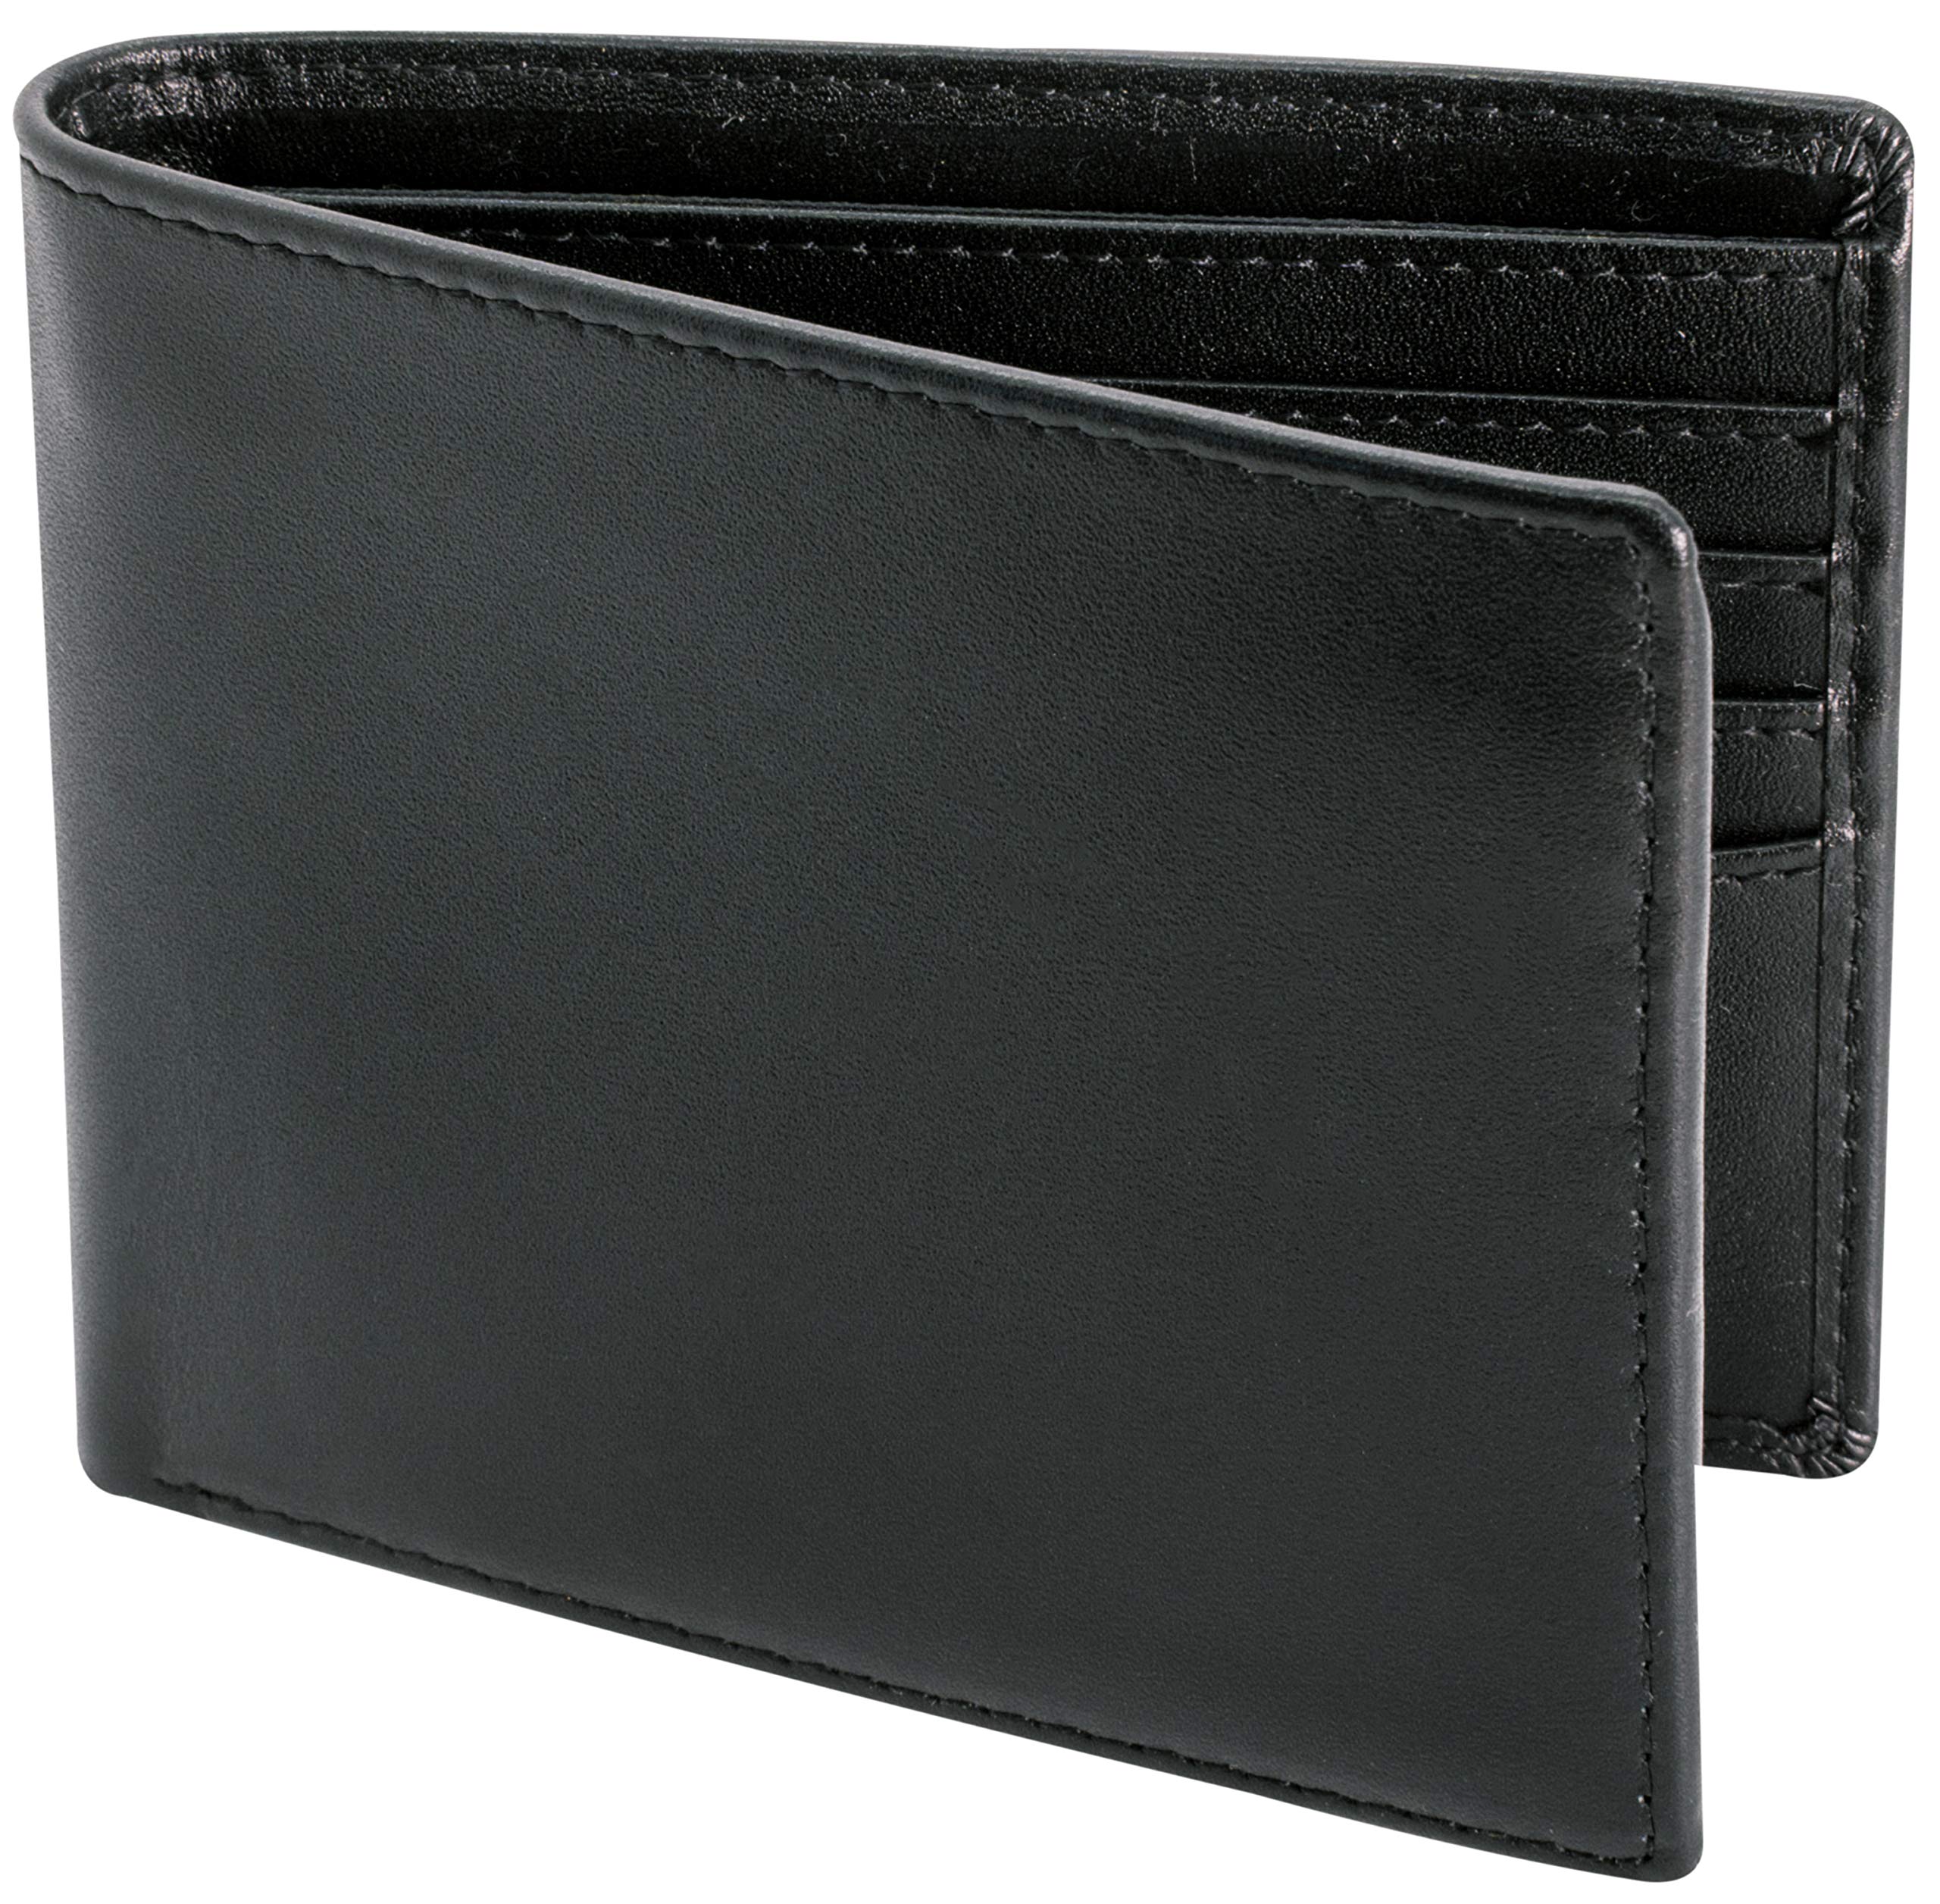 STAY FINE Top Grain Leather Wallet for Men | RFID Blocking | Extra Capacity Bifold Wallet with 2 ID Windows | Ultra Strong Stitching | Slim Billfold with 8 Card Slots | Gift for Him